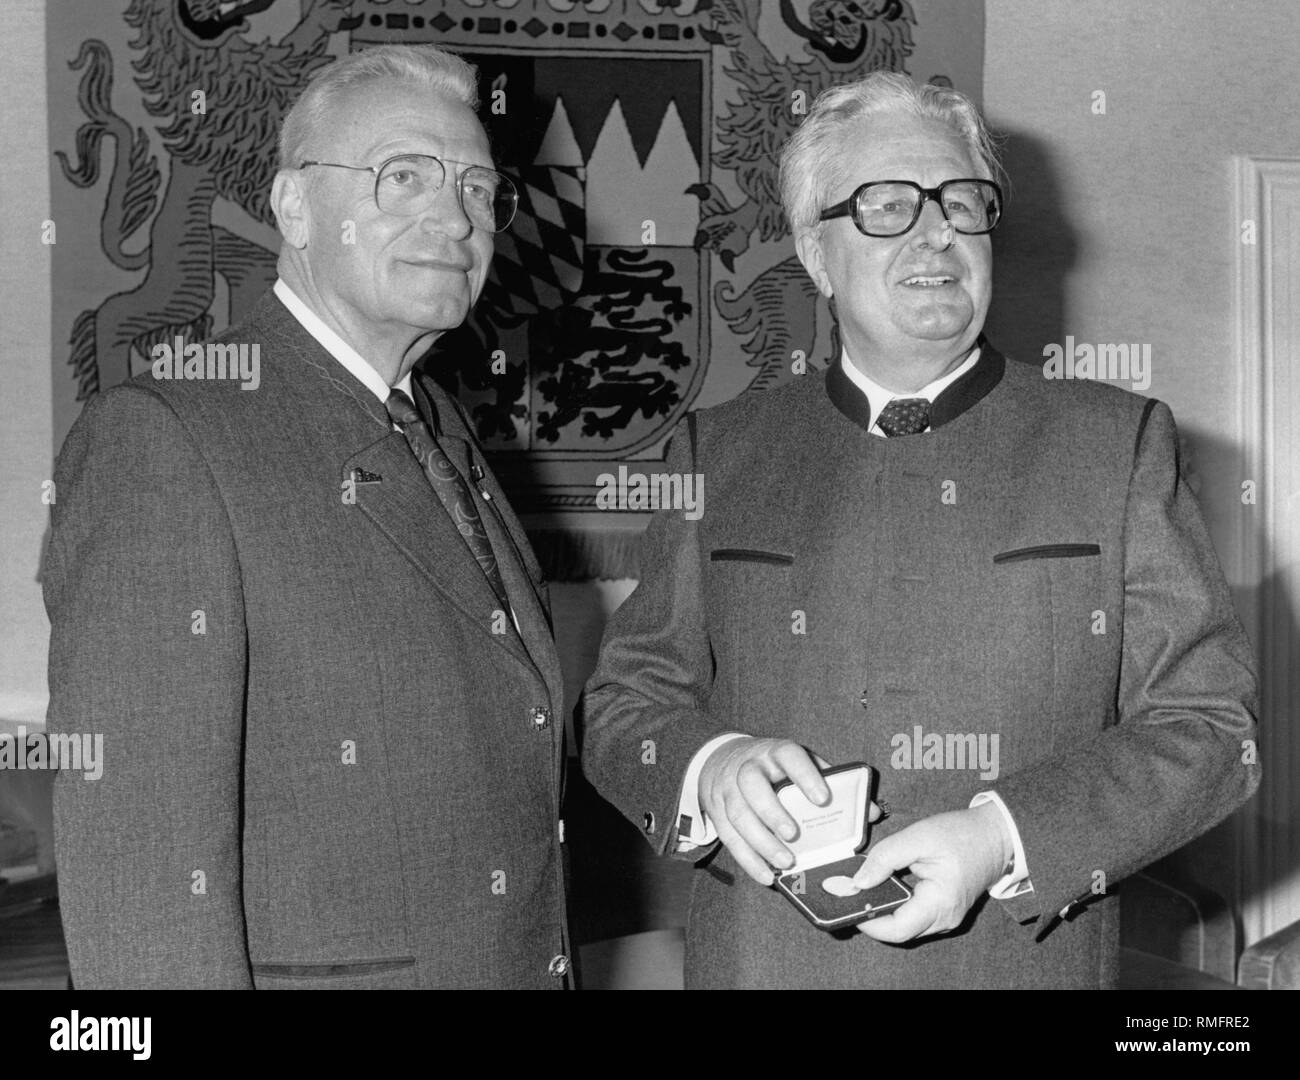 Bavarian Landtag President Franz Heubl (CSU, left) awarded the SPD politician Hans-Jochen Vogel the gold Bayerische Verfassungsmedaille in recognition of his services as mayor of Munich. In the background, the coat of arms of Bavaria (undated photo). Stock Photo